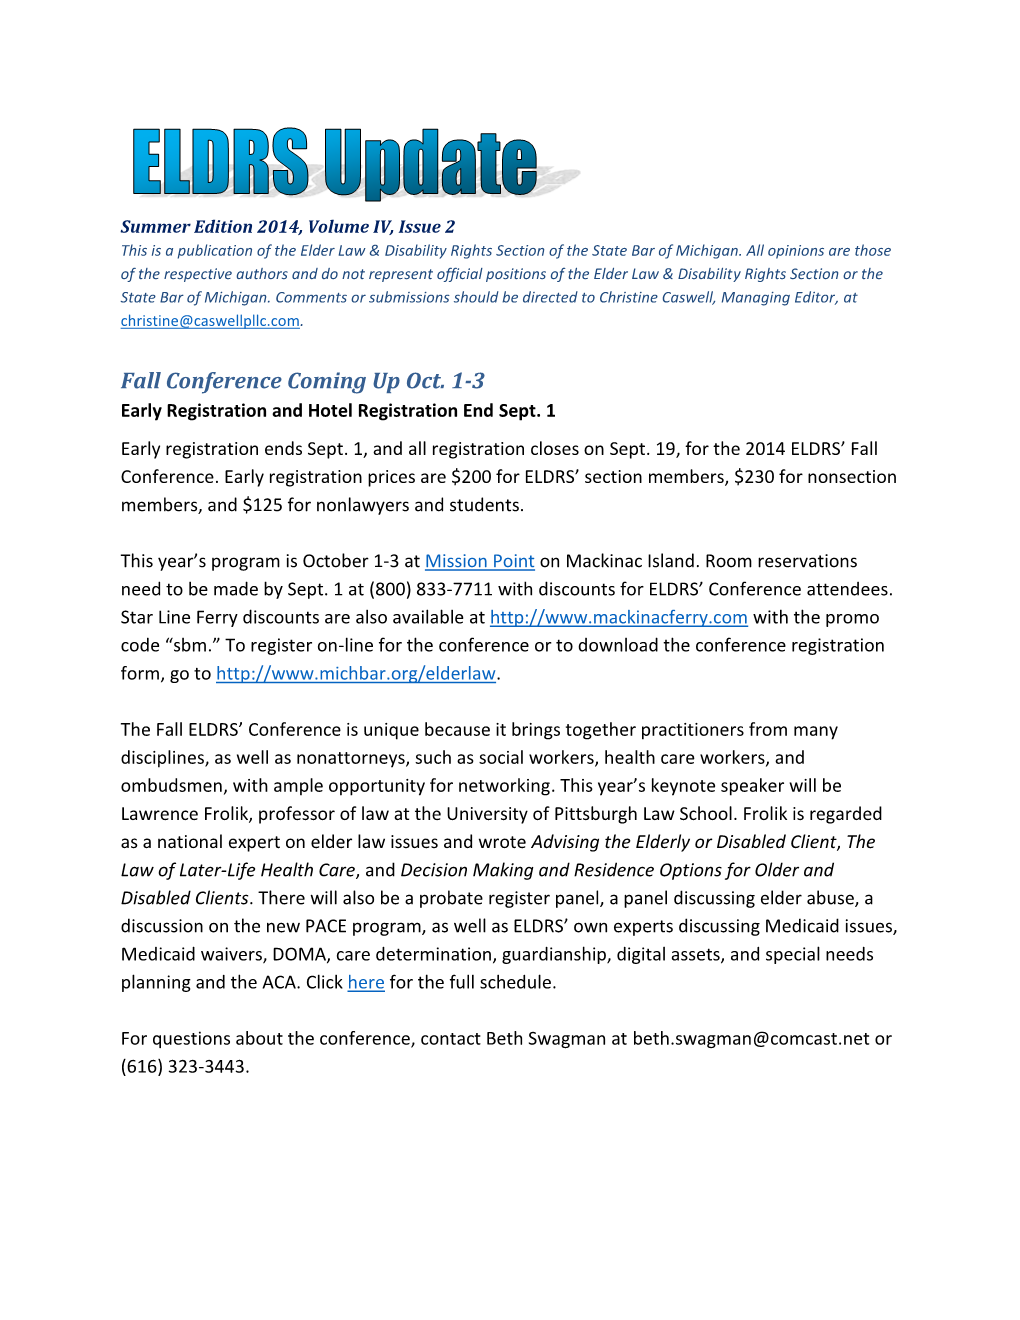 Elder Law & Disability Rights Section: Summer 2014 ELDRS Update